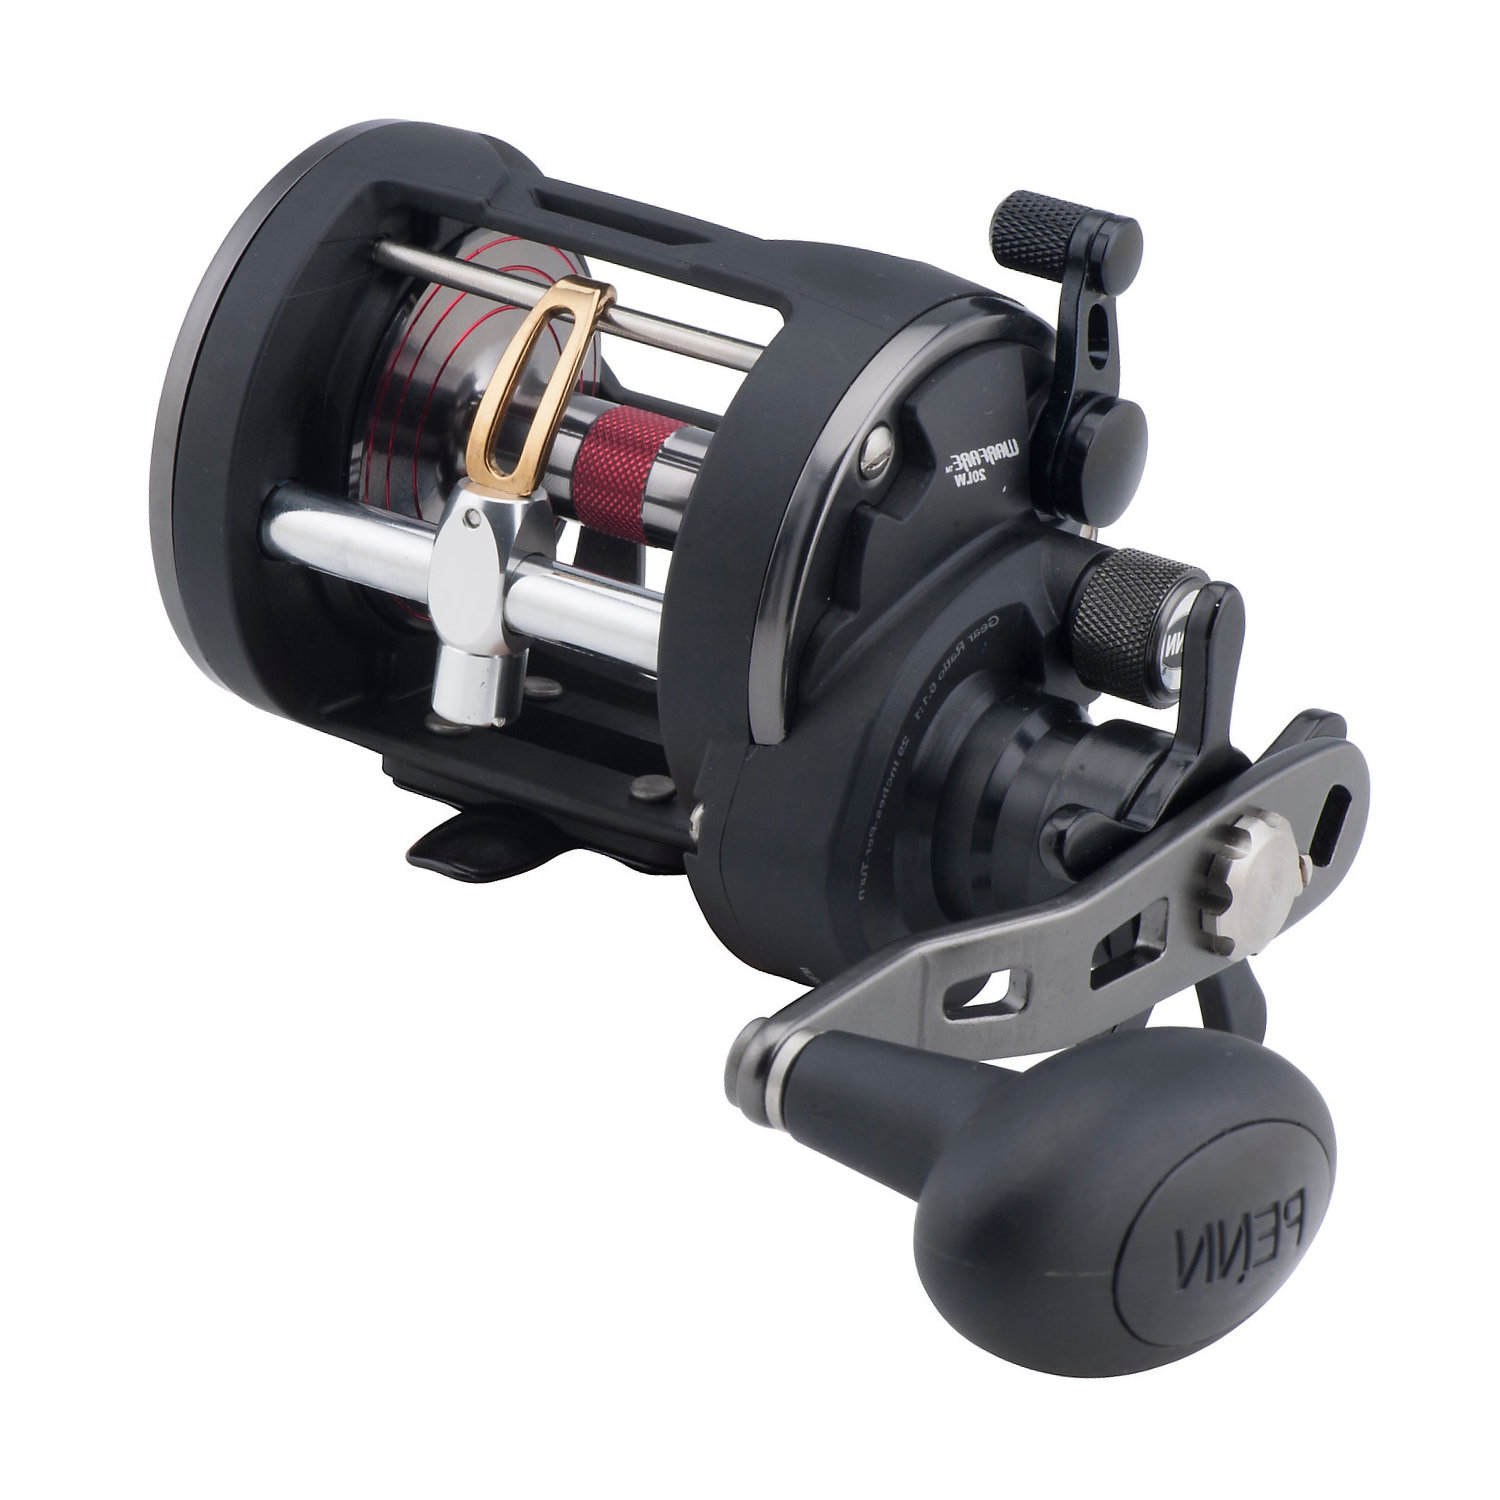 Best 8 cheap conventional reels in 2019